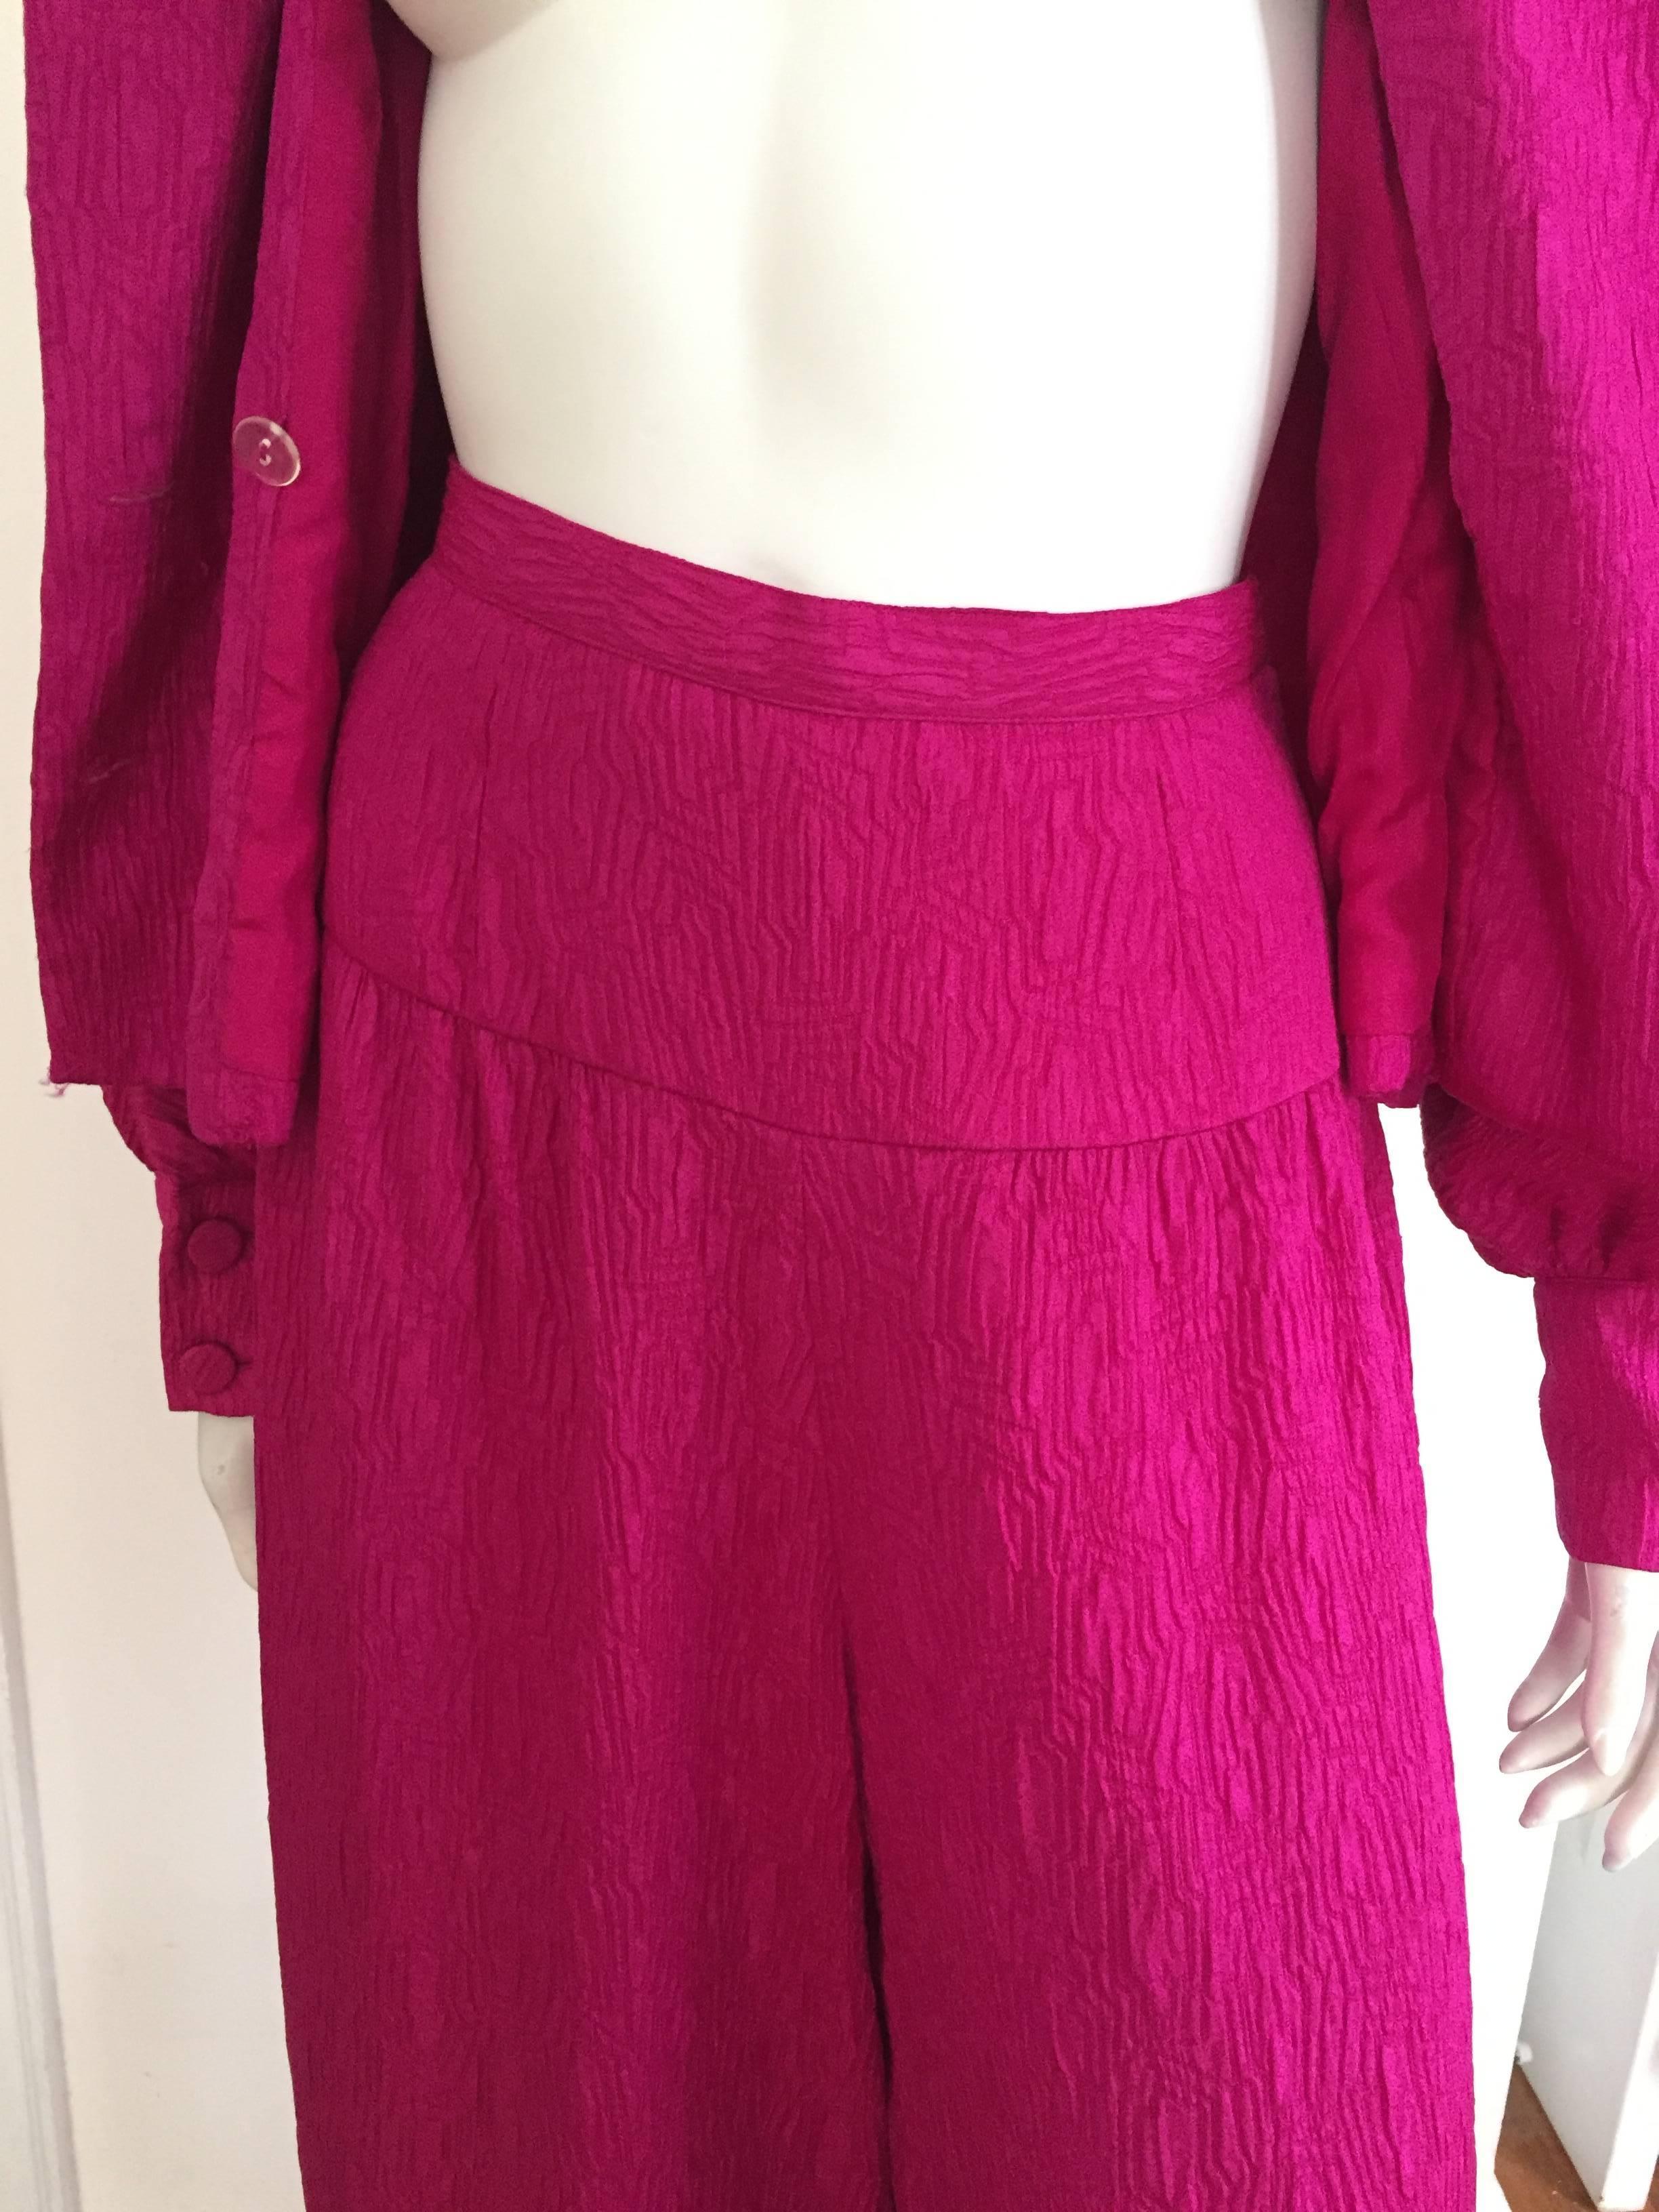 Adele Simpson Silk Pink Jacket and Palazzo Pants Size 6, 1980s For Sale 2